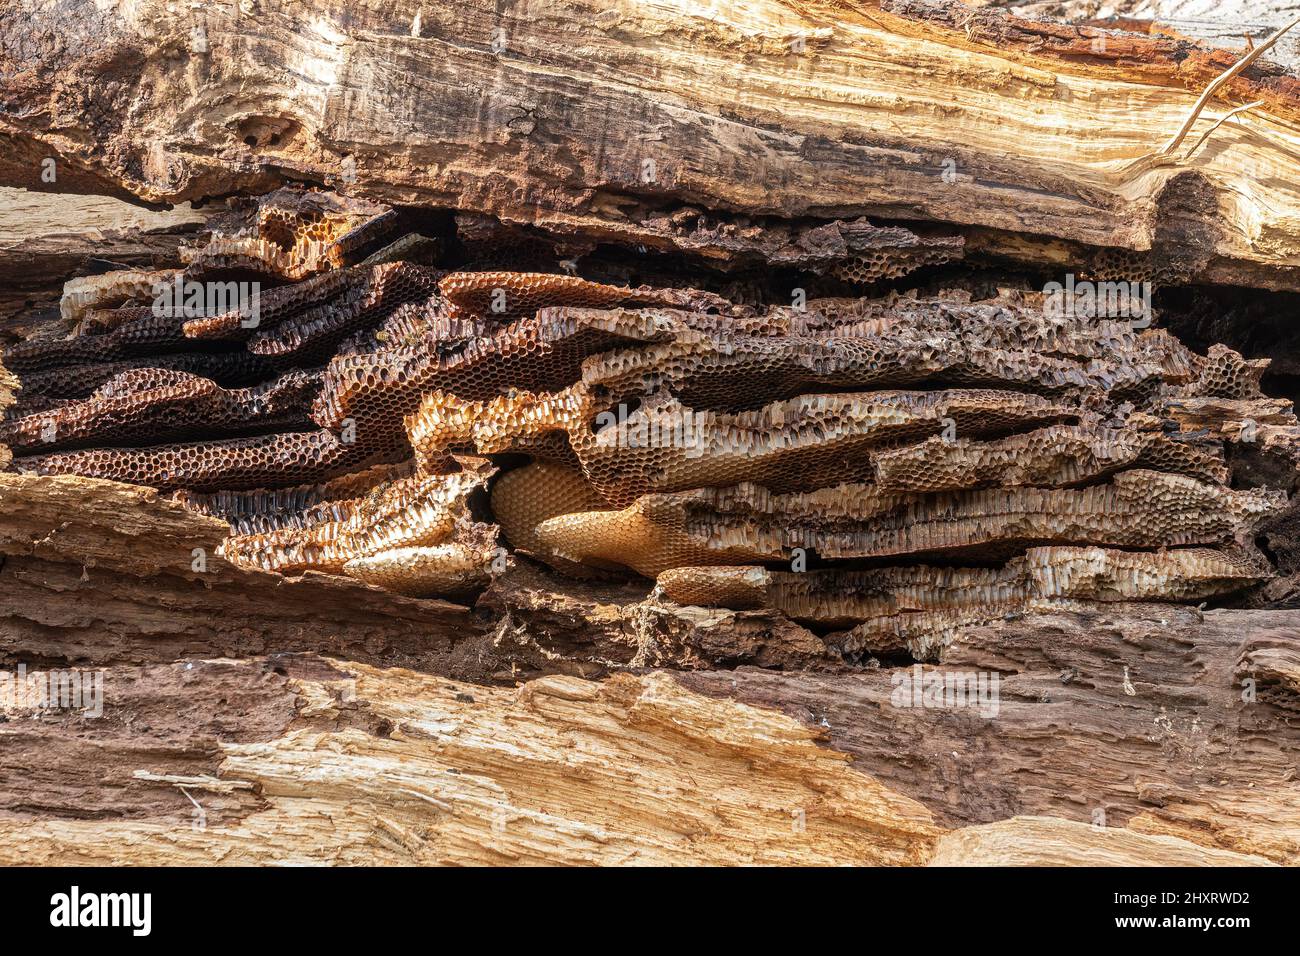 Wild honey bee nest showing the honeycomb structure (natural Apis mellifera beehive) in a hollow oak tree, UK Stock Photo